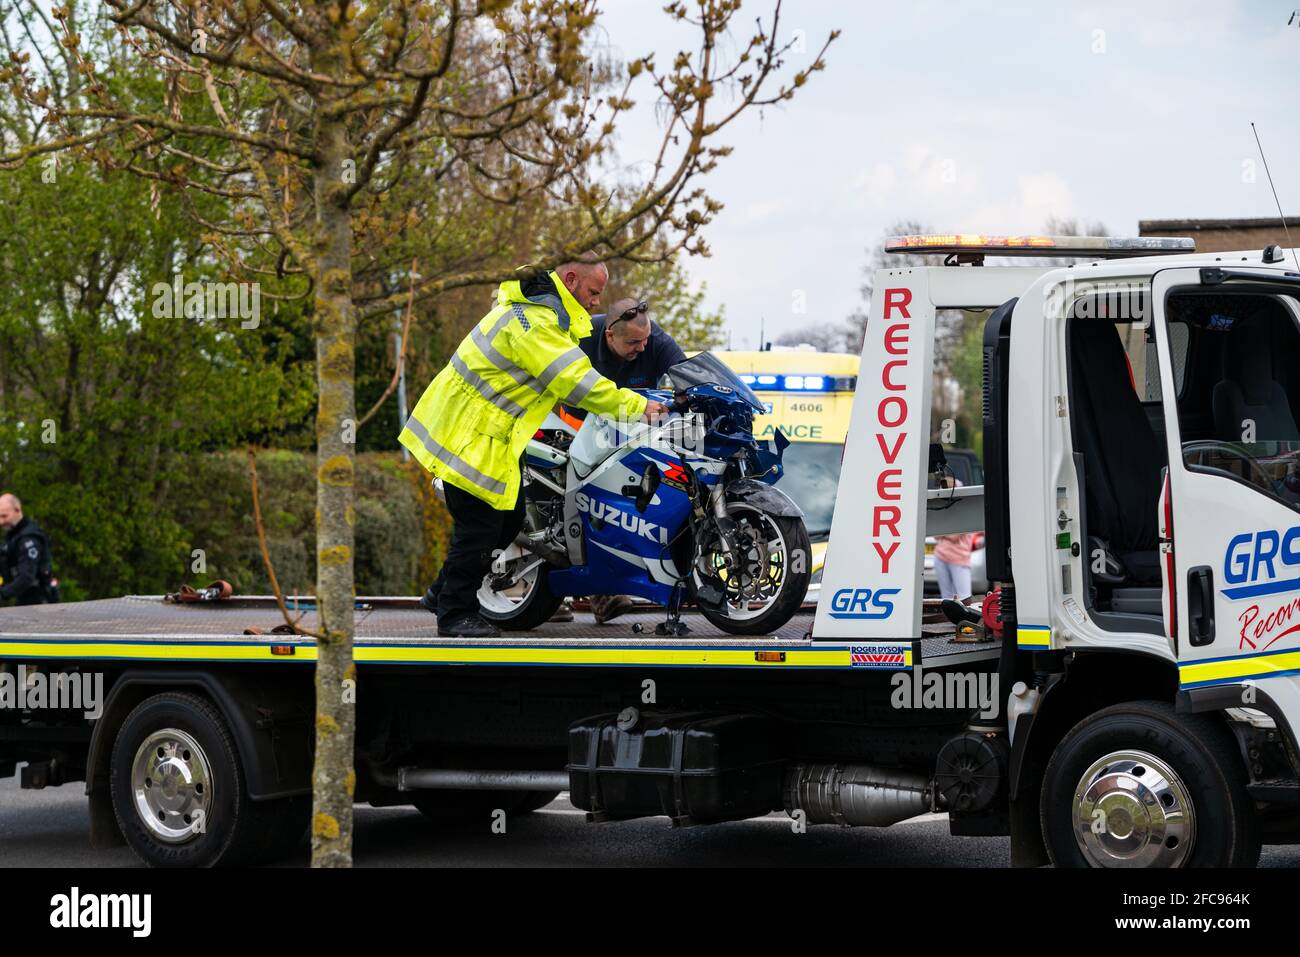 Police officer loading a Suzuki motorbike onto a recovery truck after a road traffic collision in Leamington Spa, UK. Warwickshire Police. Stock Photo